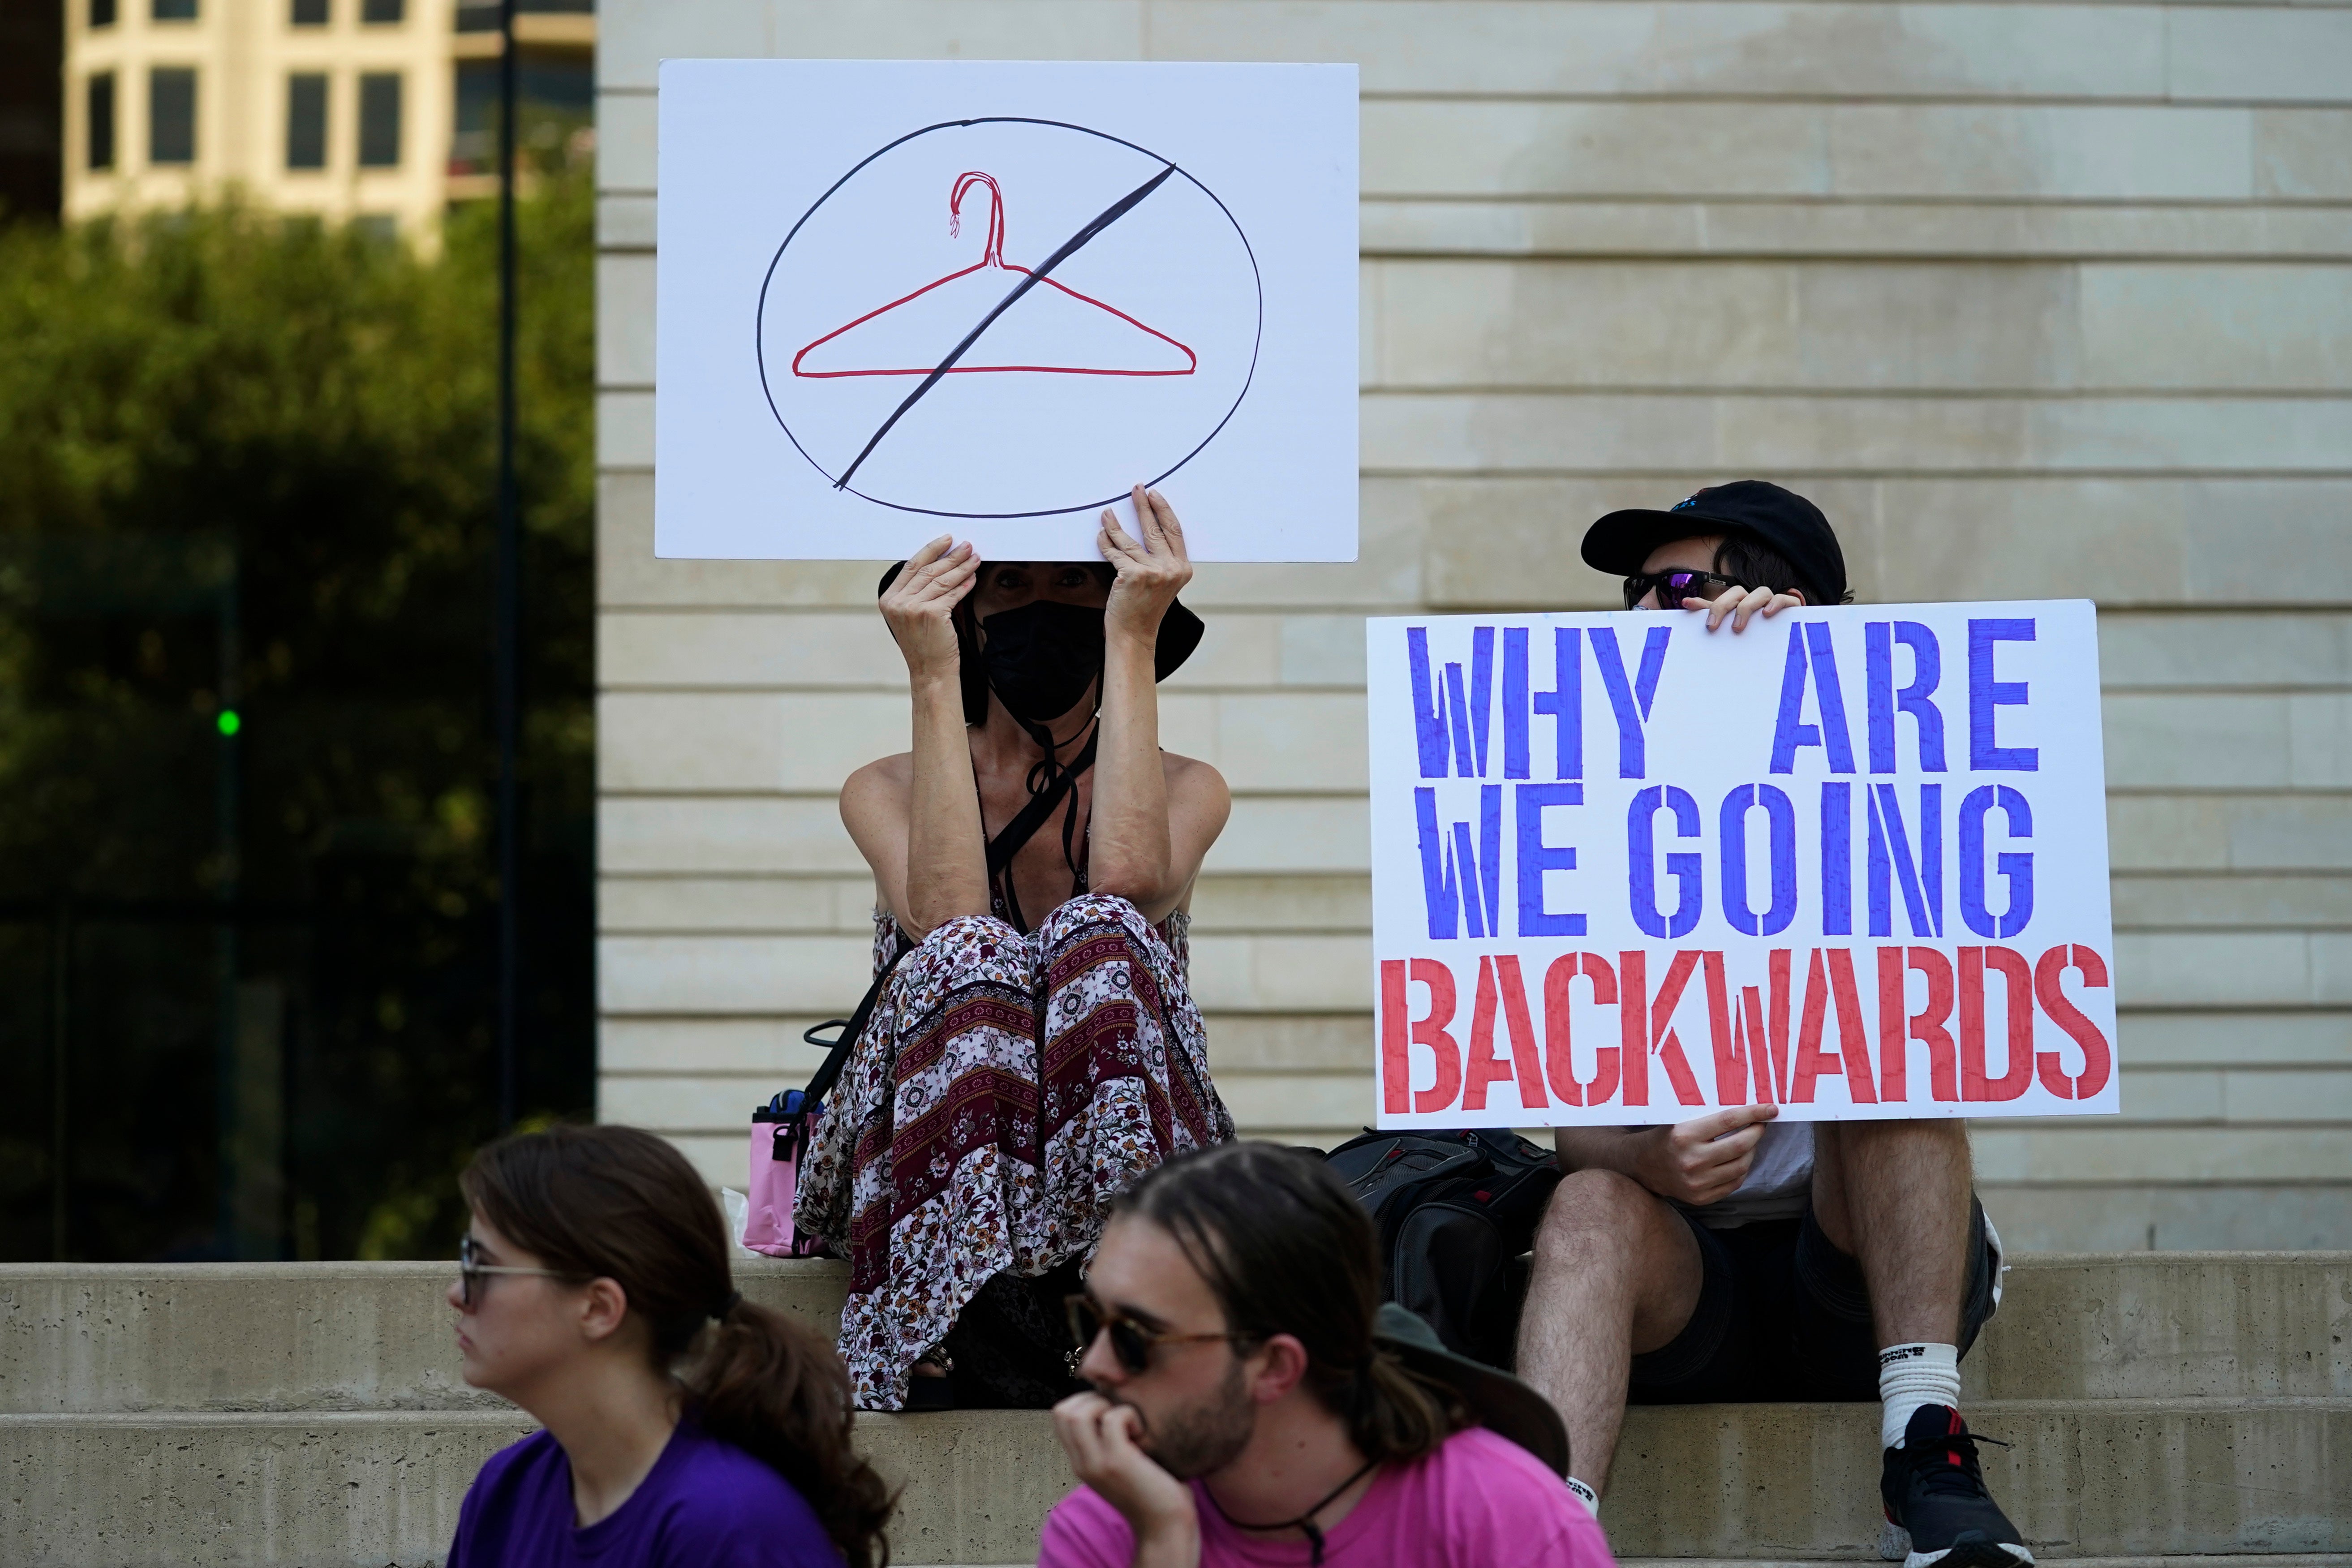 Demonstrators at the federal courthouse in Austin following the US Supreme Court's decision to overturn Roe v Wade in June 2022